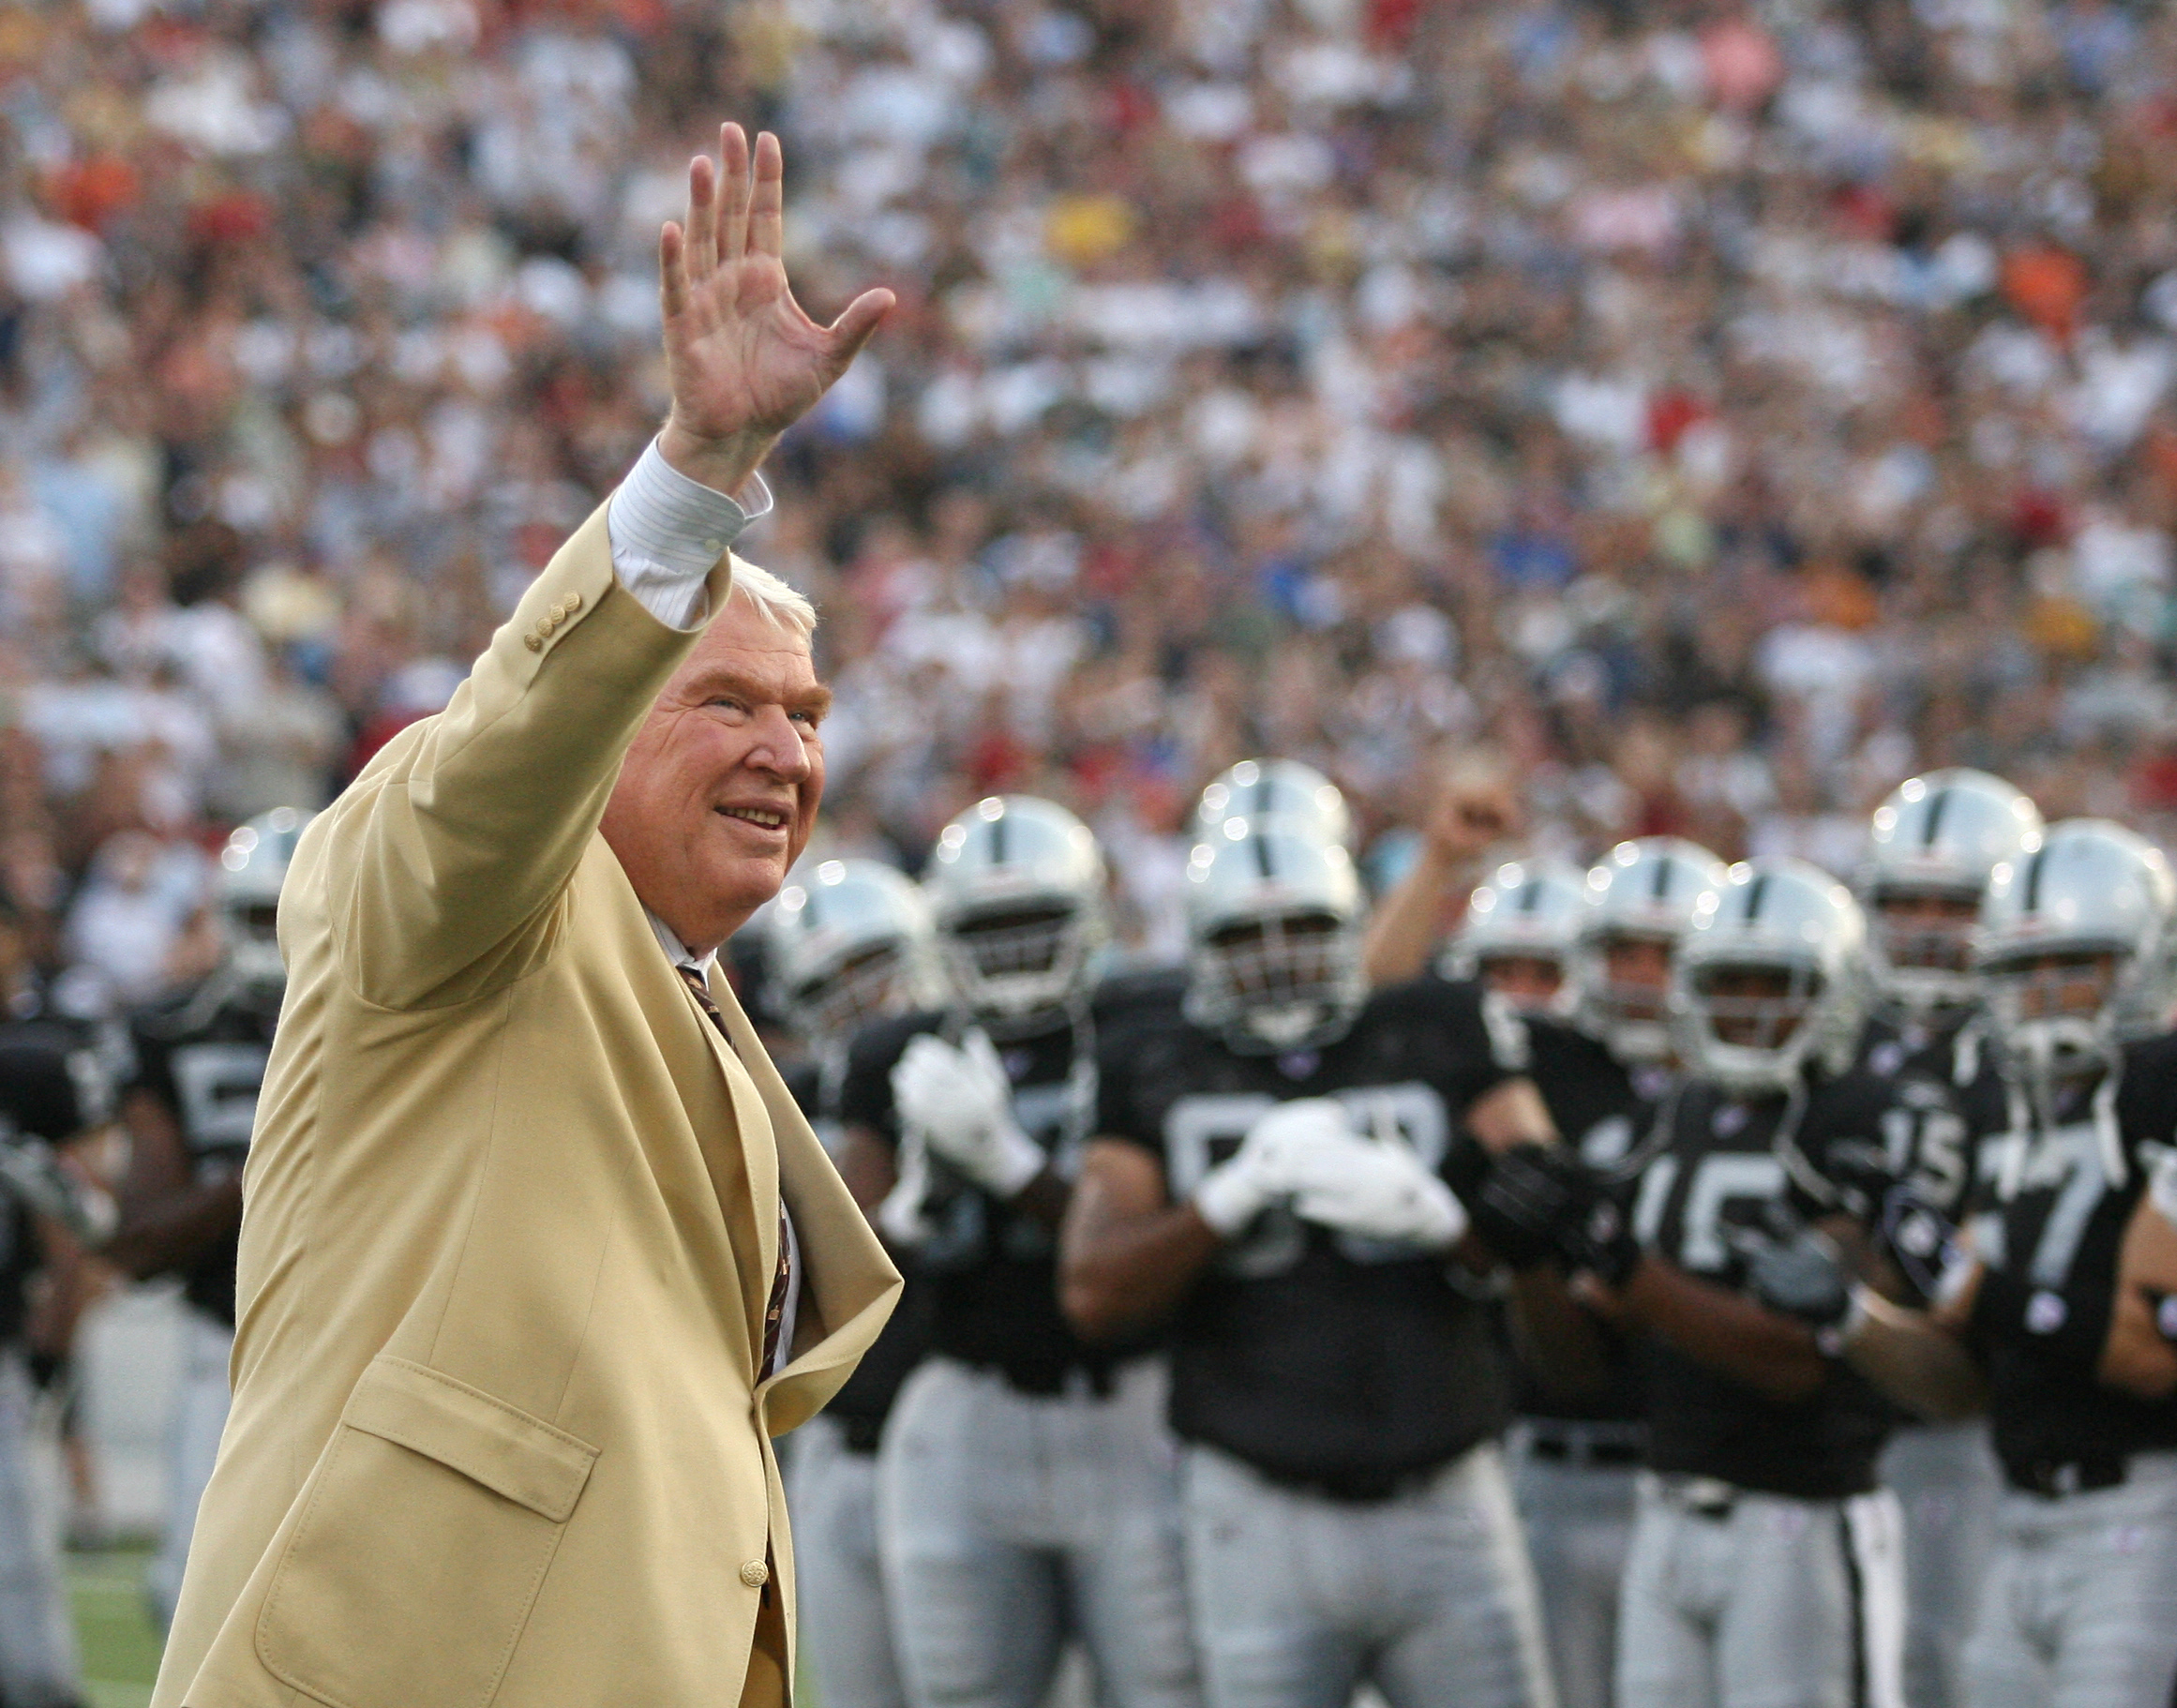 Former Oakland Raiders' coach John Madden waves to the crowd before the Hall of Fame game in Canton, Ohio